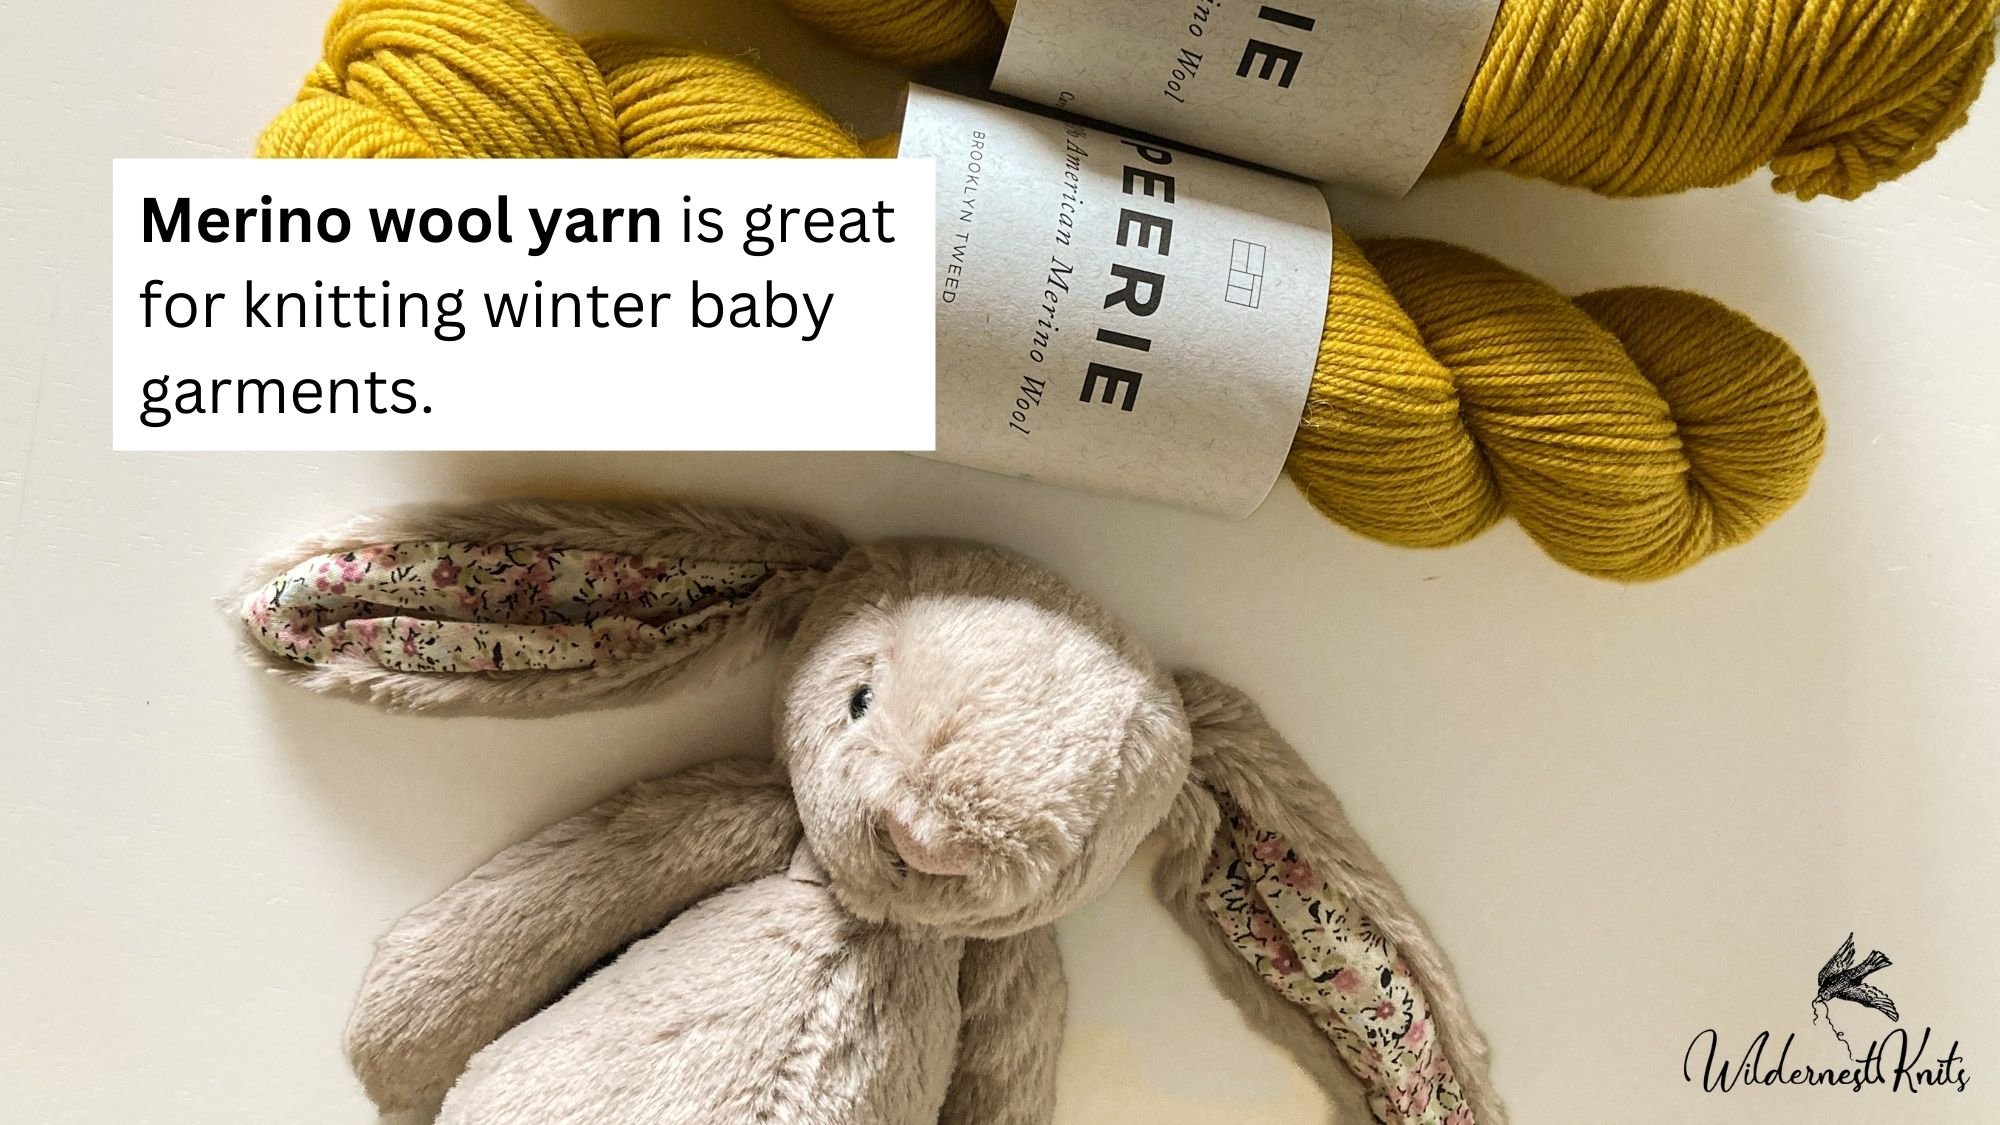 What is the Best Yarn for Baby Blankets?